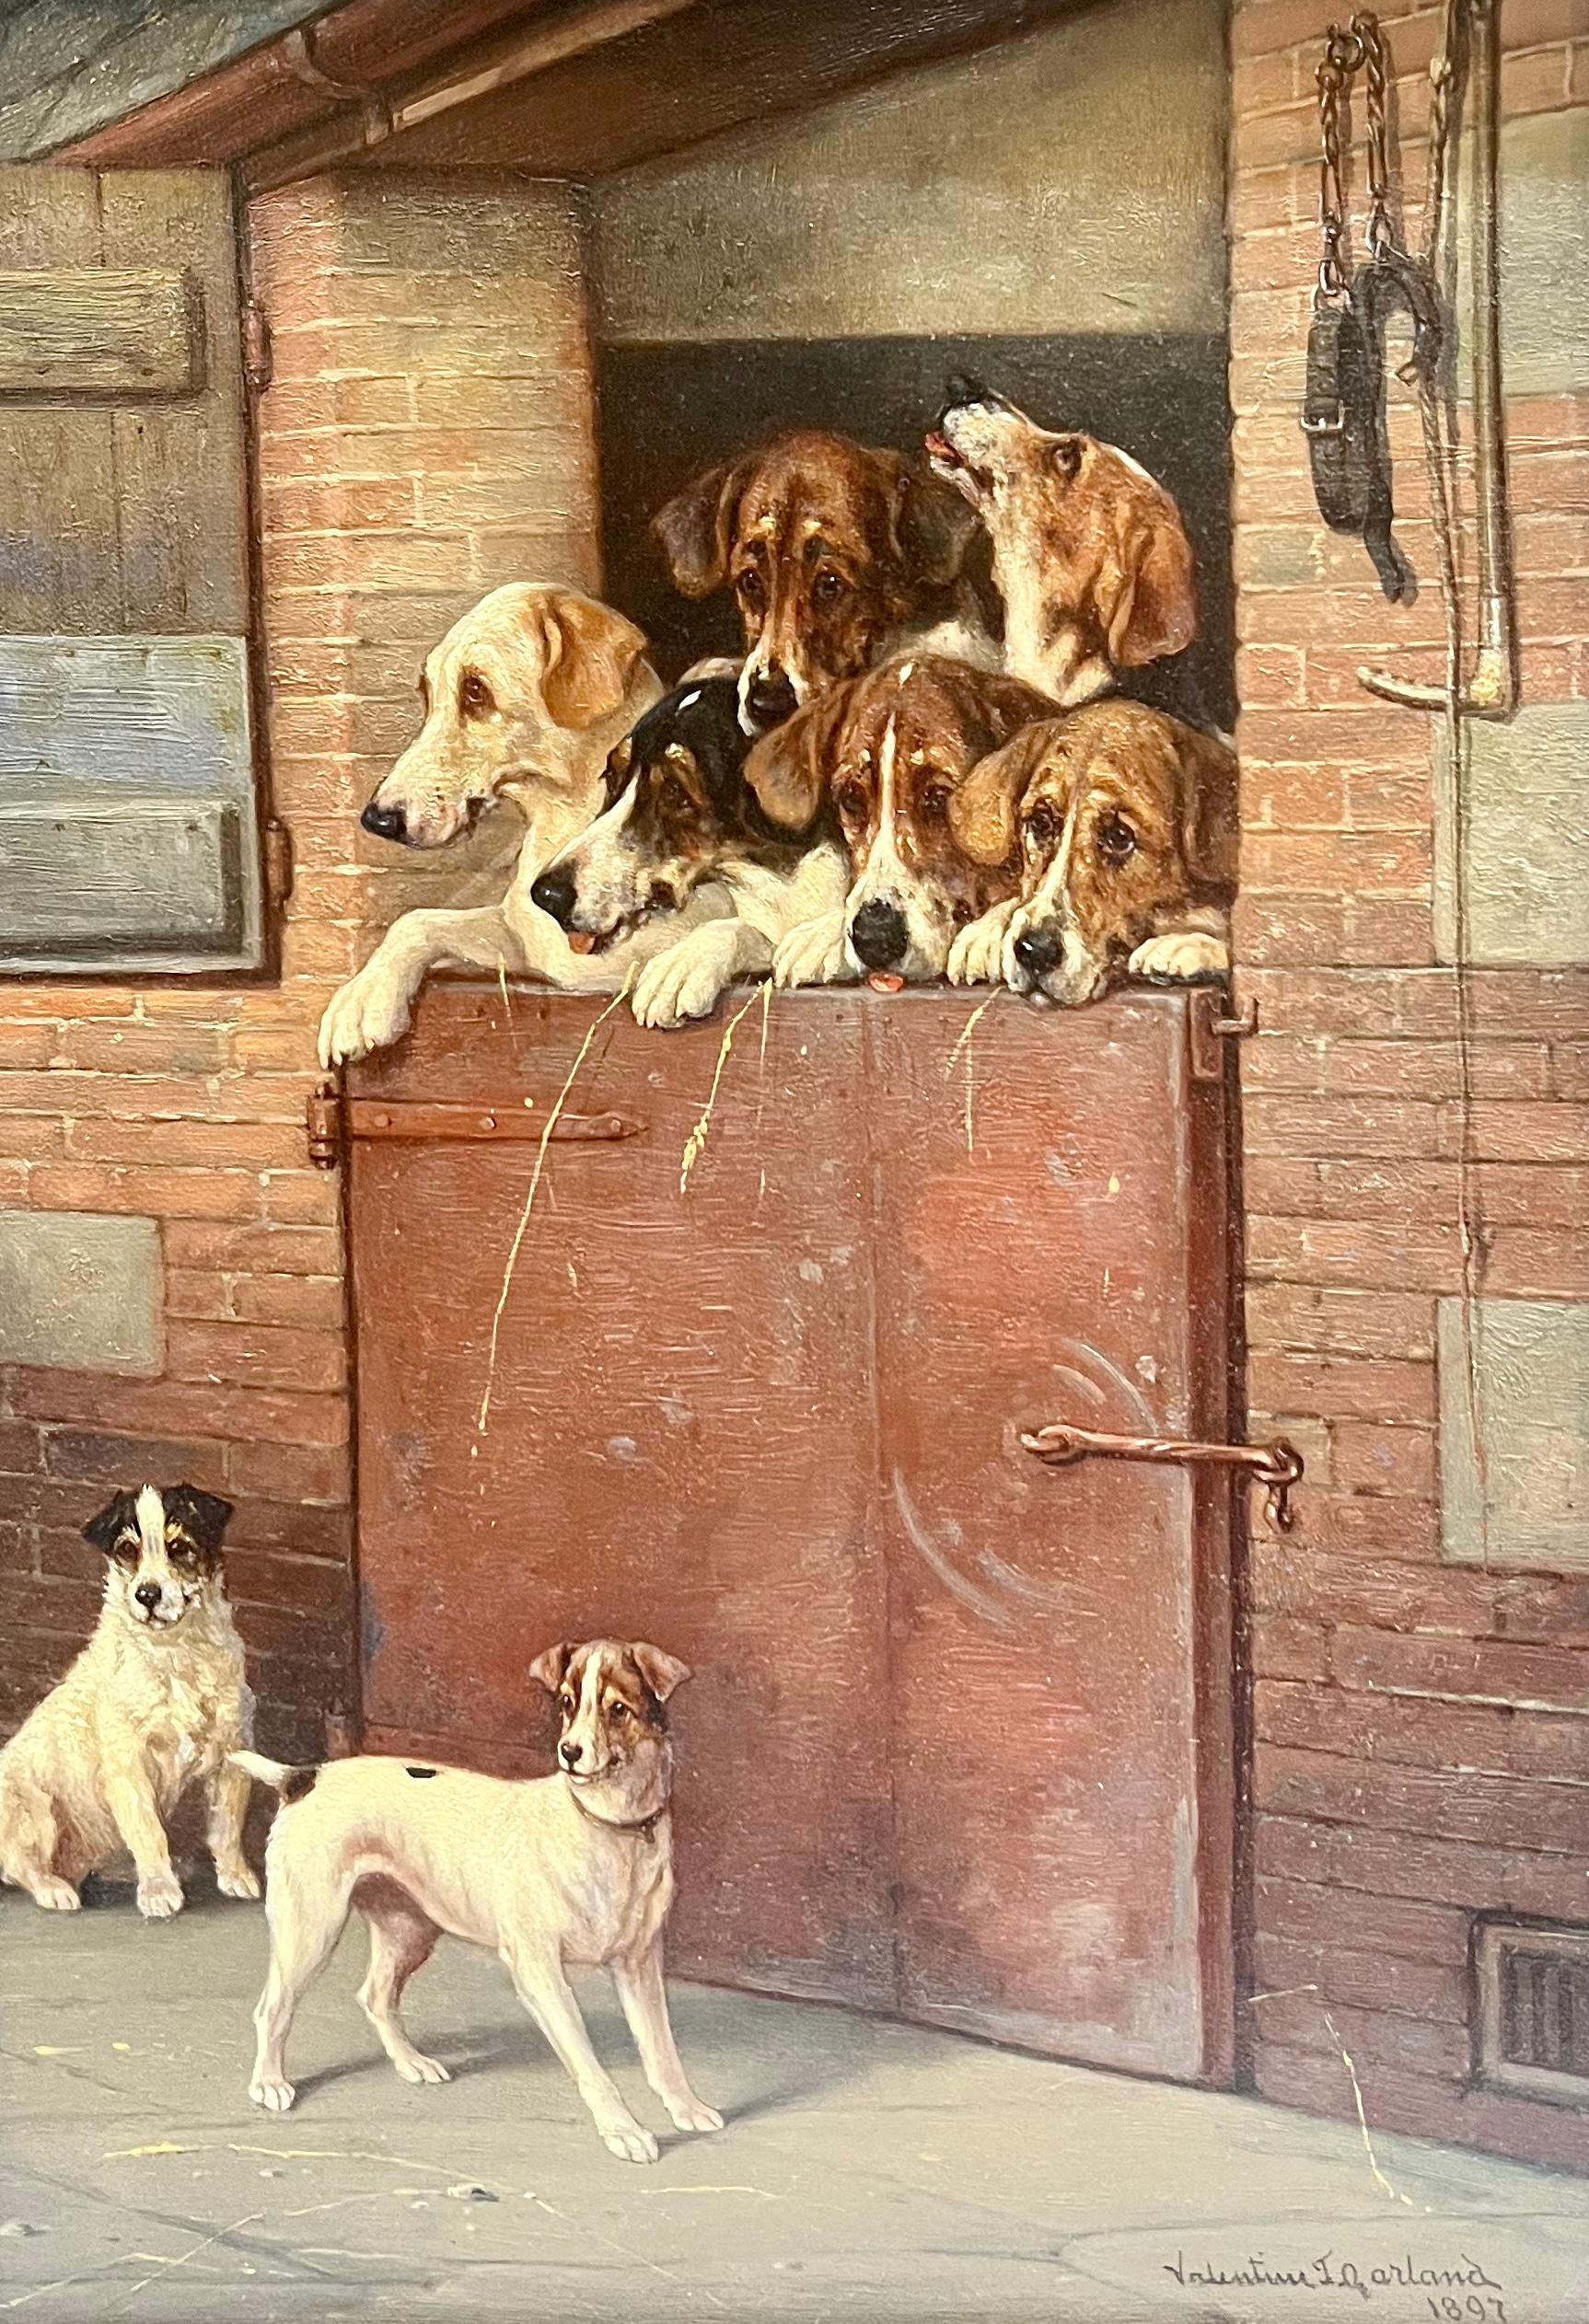 Up for sale is a beautiful original painting by Valentine Thomas GARLAND (1868-1914).  Garland was a painter of animal and genre subjects, working in both oil and watercolor. He was the son of the artist Henry Garland of Winchester. He exhibited